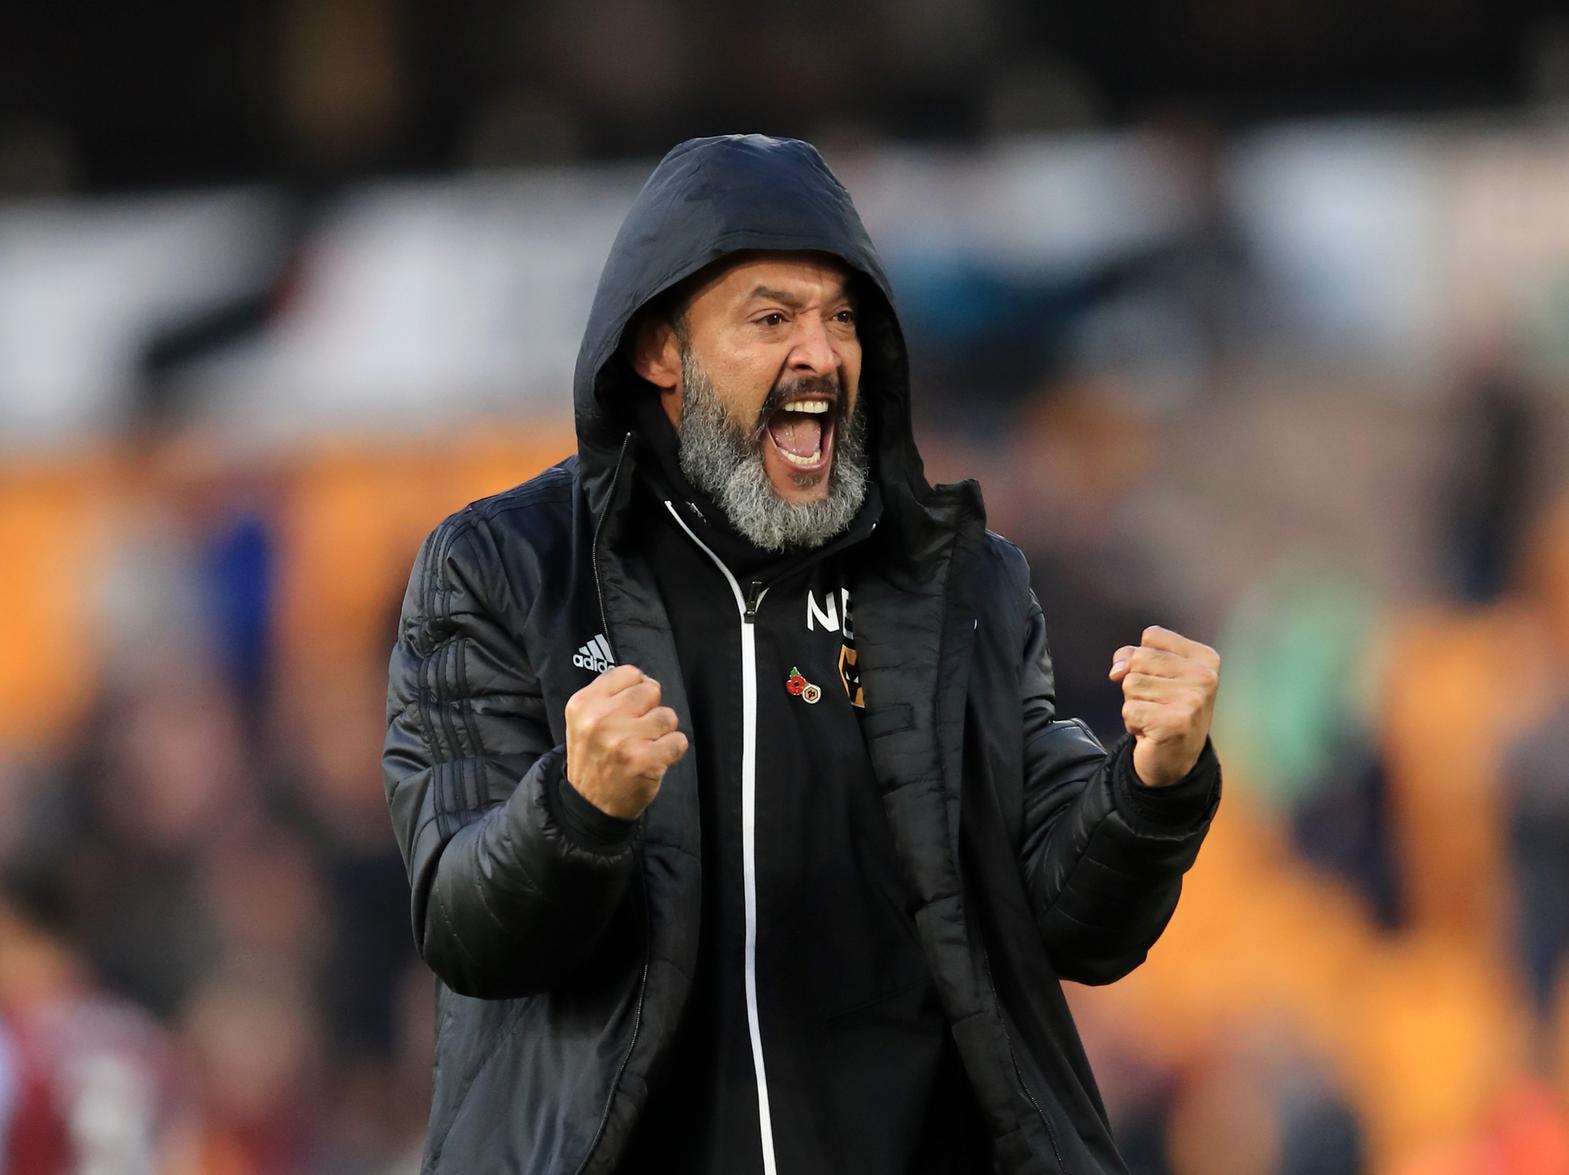 Wolves were slow starters in the Premier League this season, but they're up and running now. The club are also on the cusp of qualifying for the Europa League knockout phase.